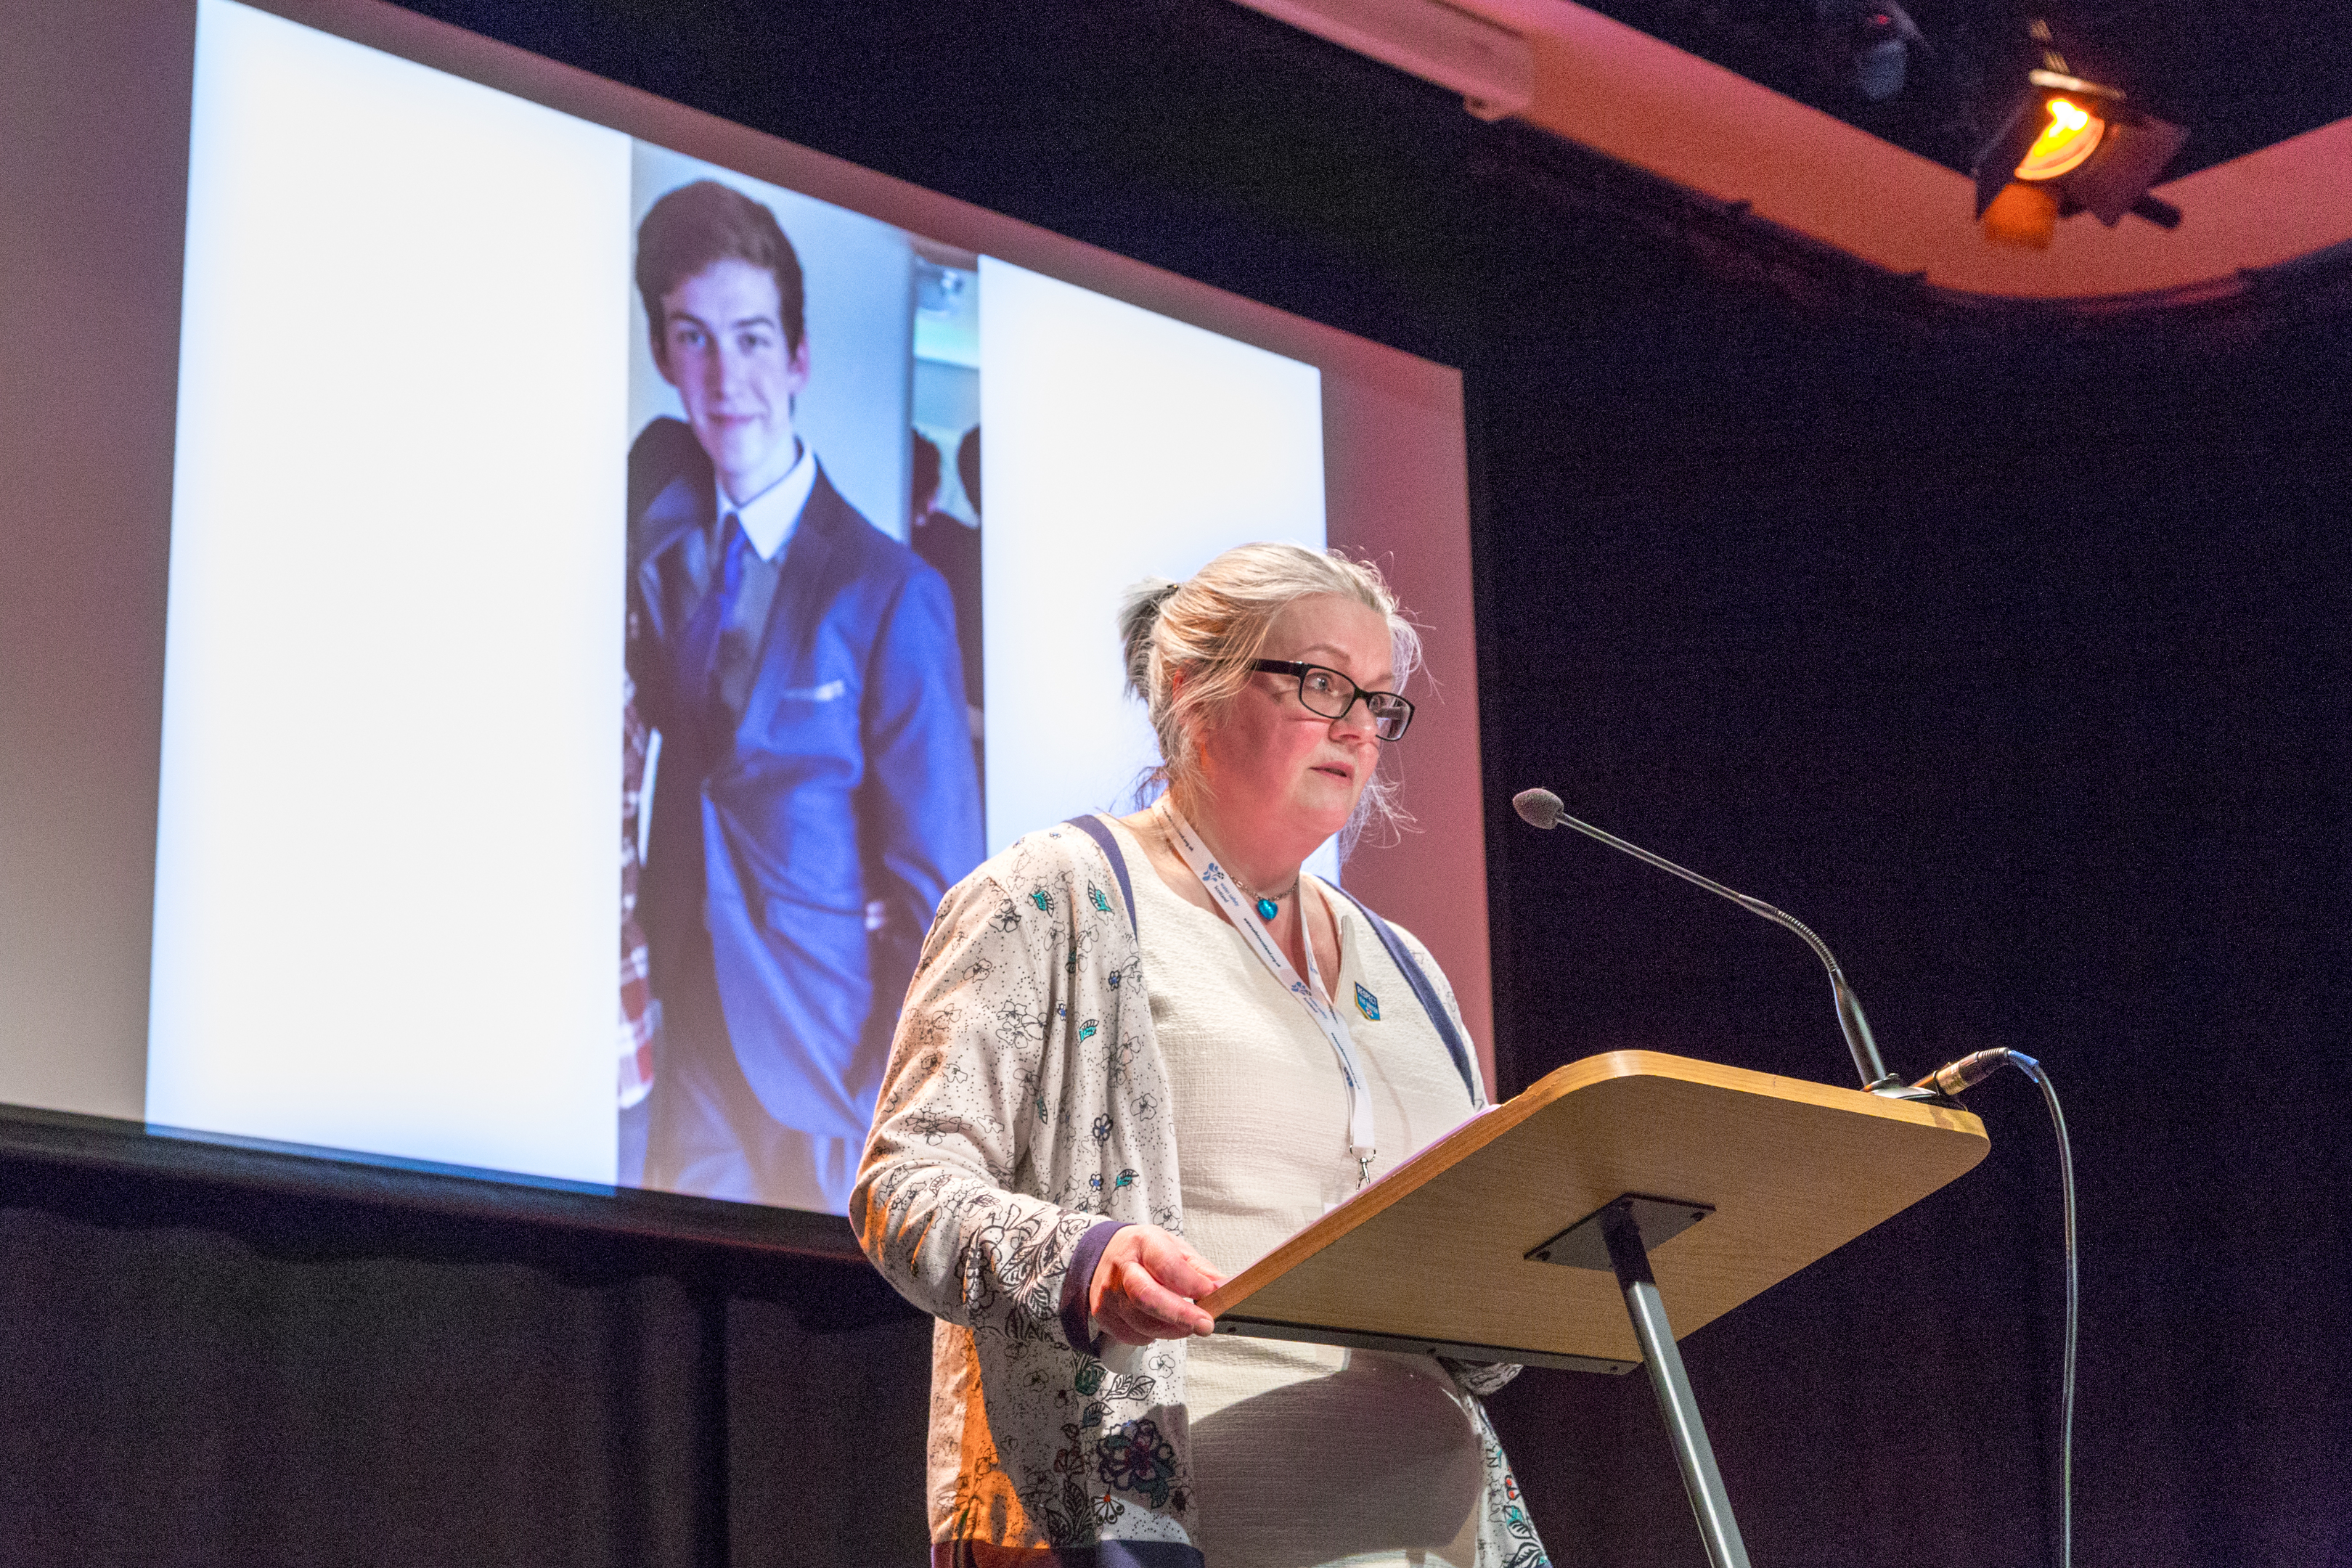 Gillian Barclay spoke in honour of her "darling son" Cameron Lancaster at a RoSPA water safety conference in Edinburgh.